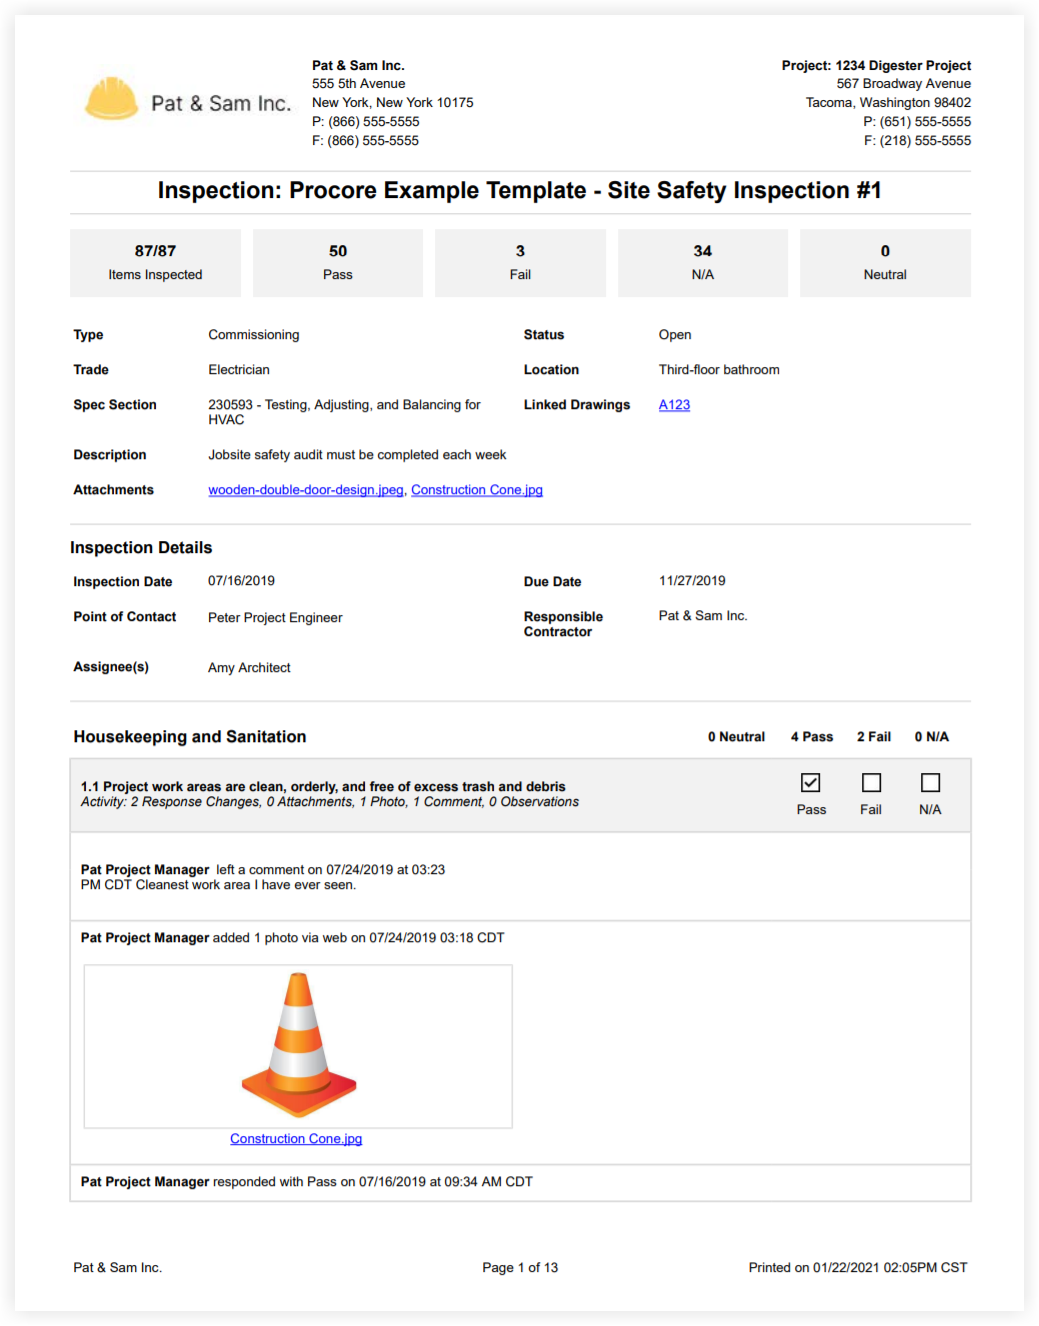 inspections-ann-updated-pdf-export.png